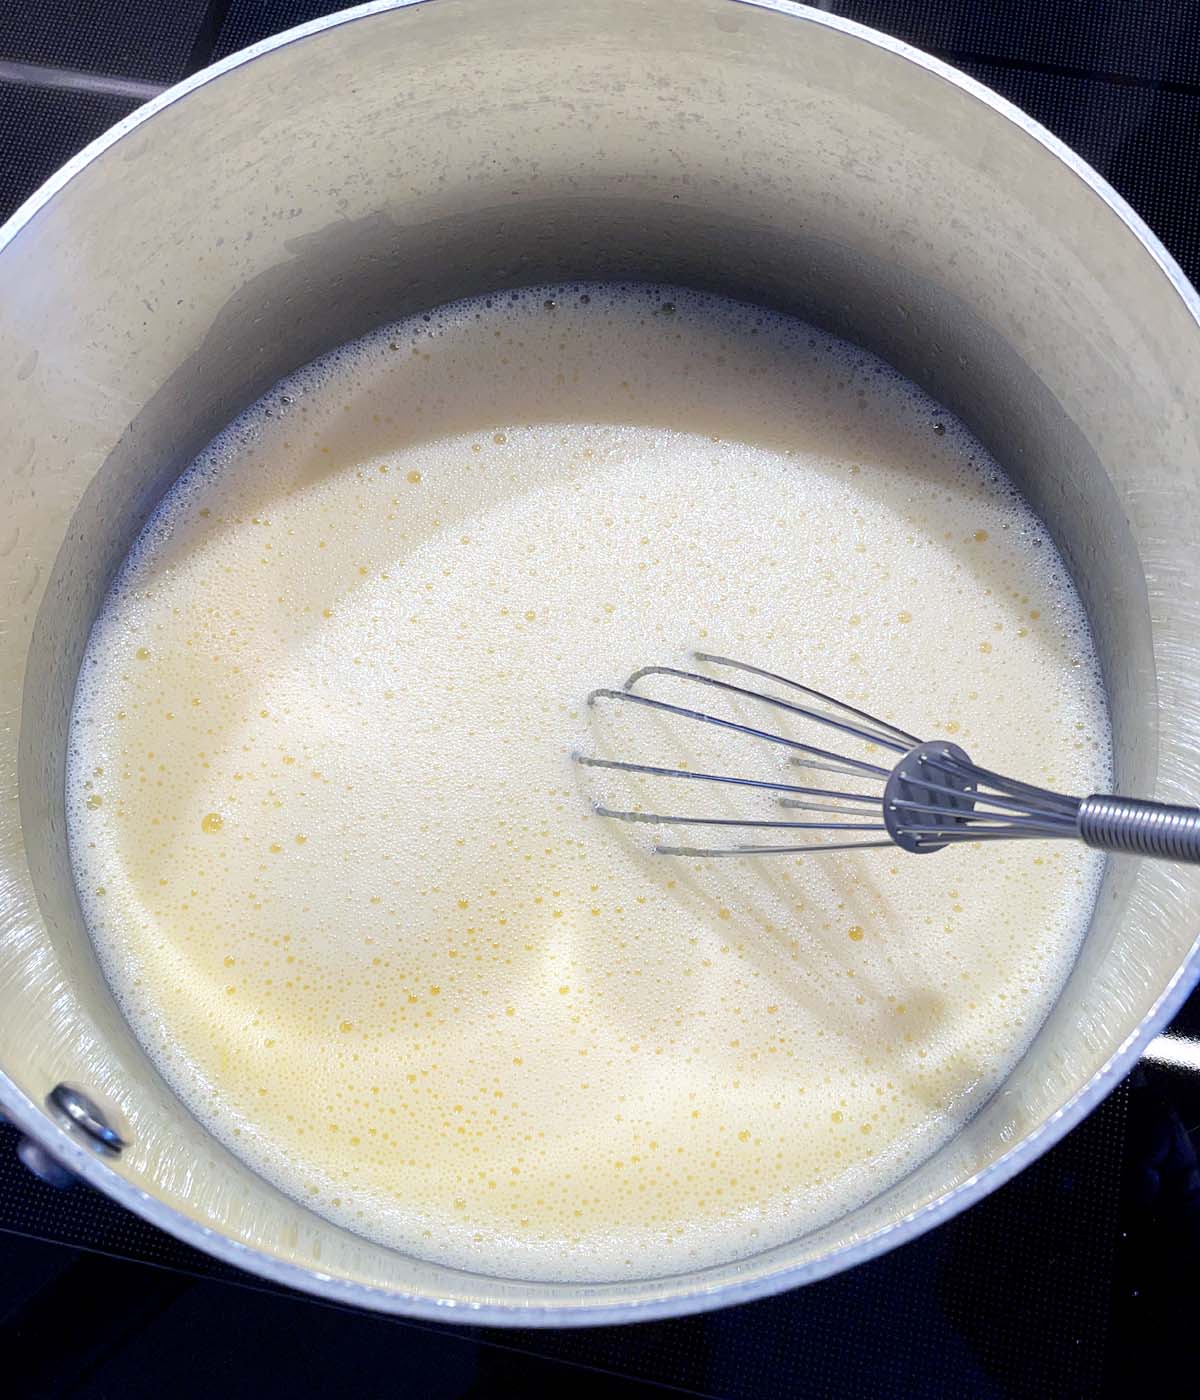 A metal pot containing a whisk and foamy yellow liquid.